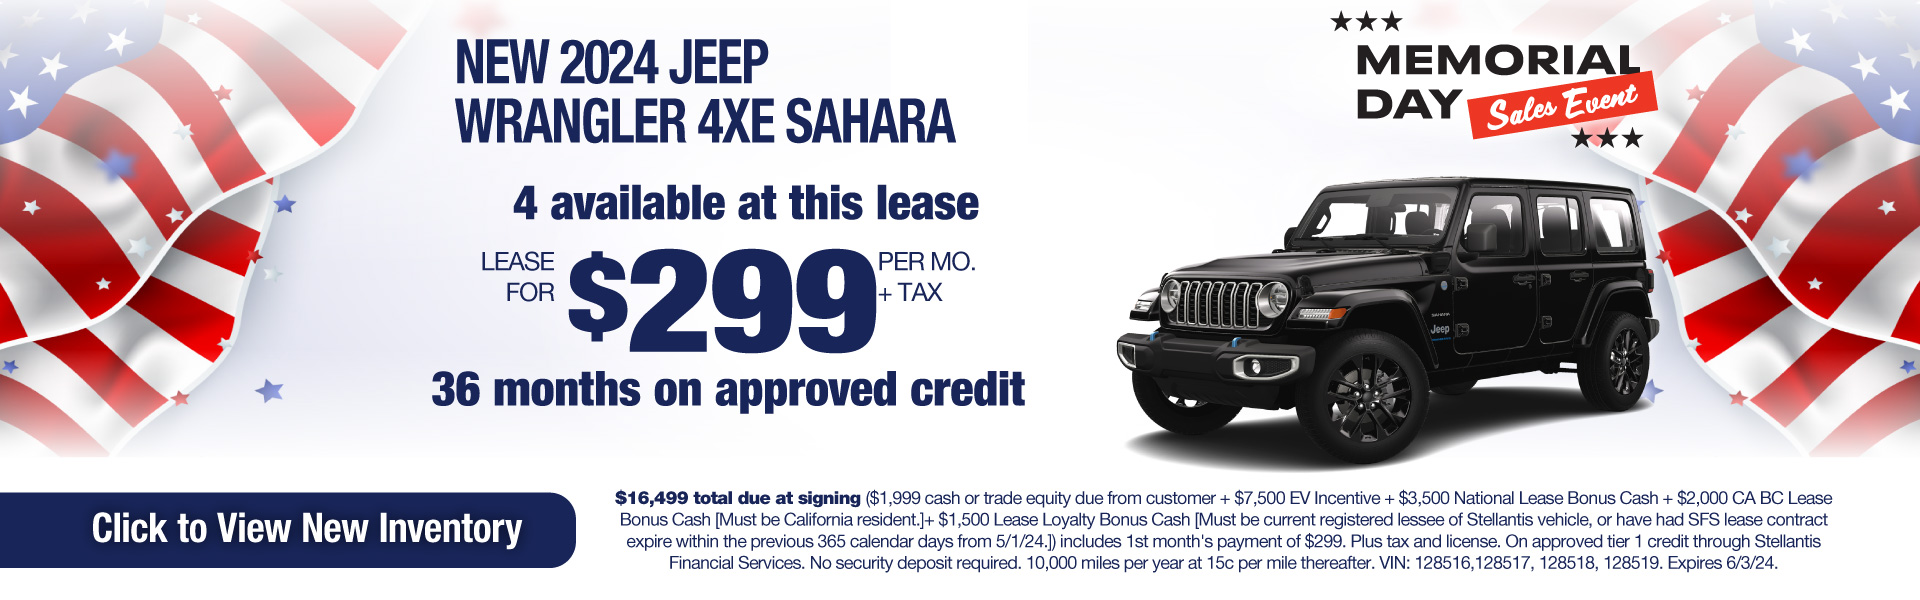 Lease a New 2024 Jeep Wrangler 4xe Sahara for $299 per month plus tax! Expires 6/3/24.